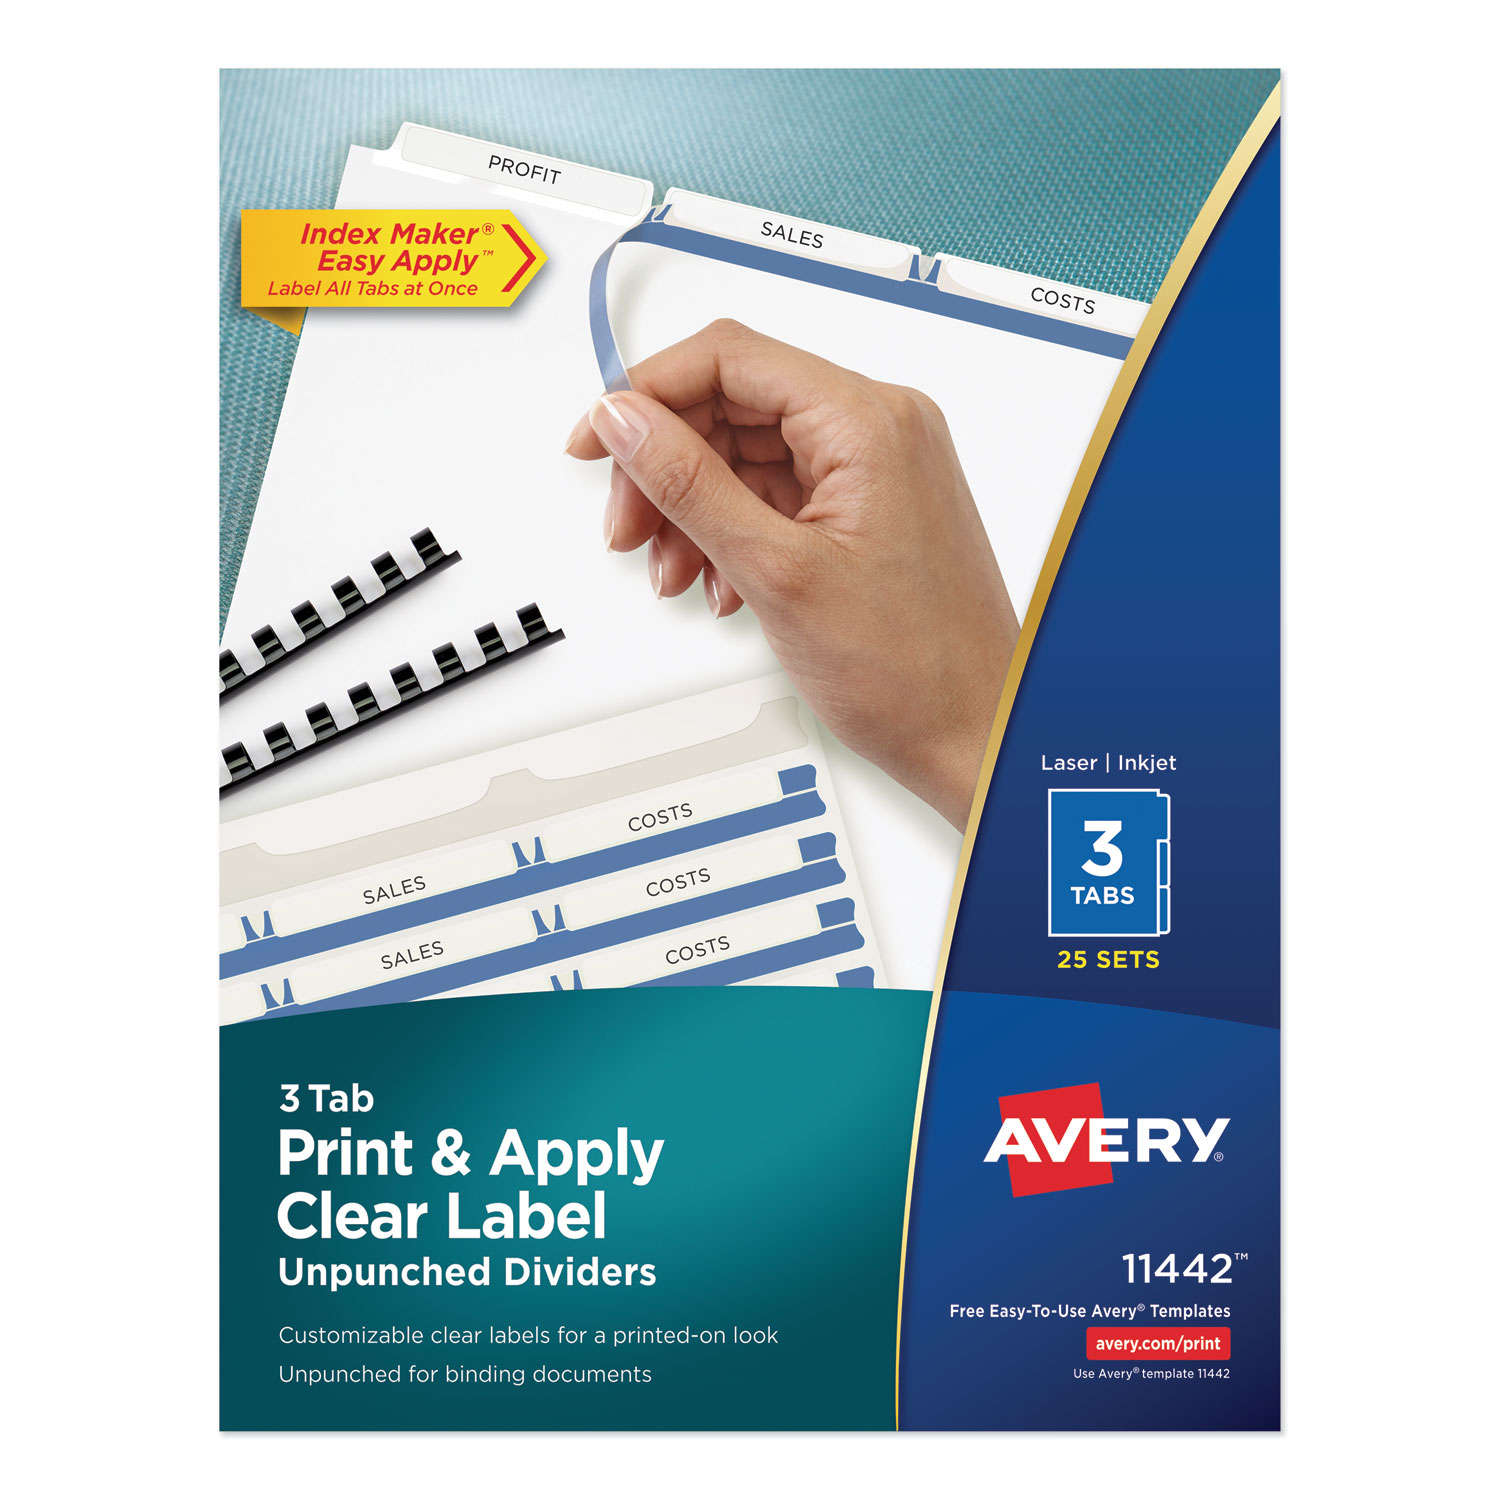  Avery 11442 Print and Apply Index Maker Clear Label Unpunched Dividers, 3-Tab, Ltr, 25 Sets (AVE11442) 